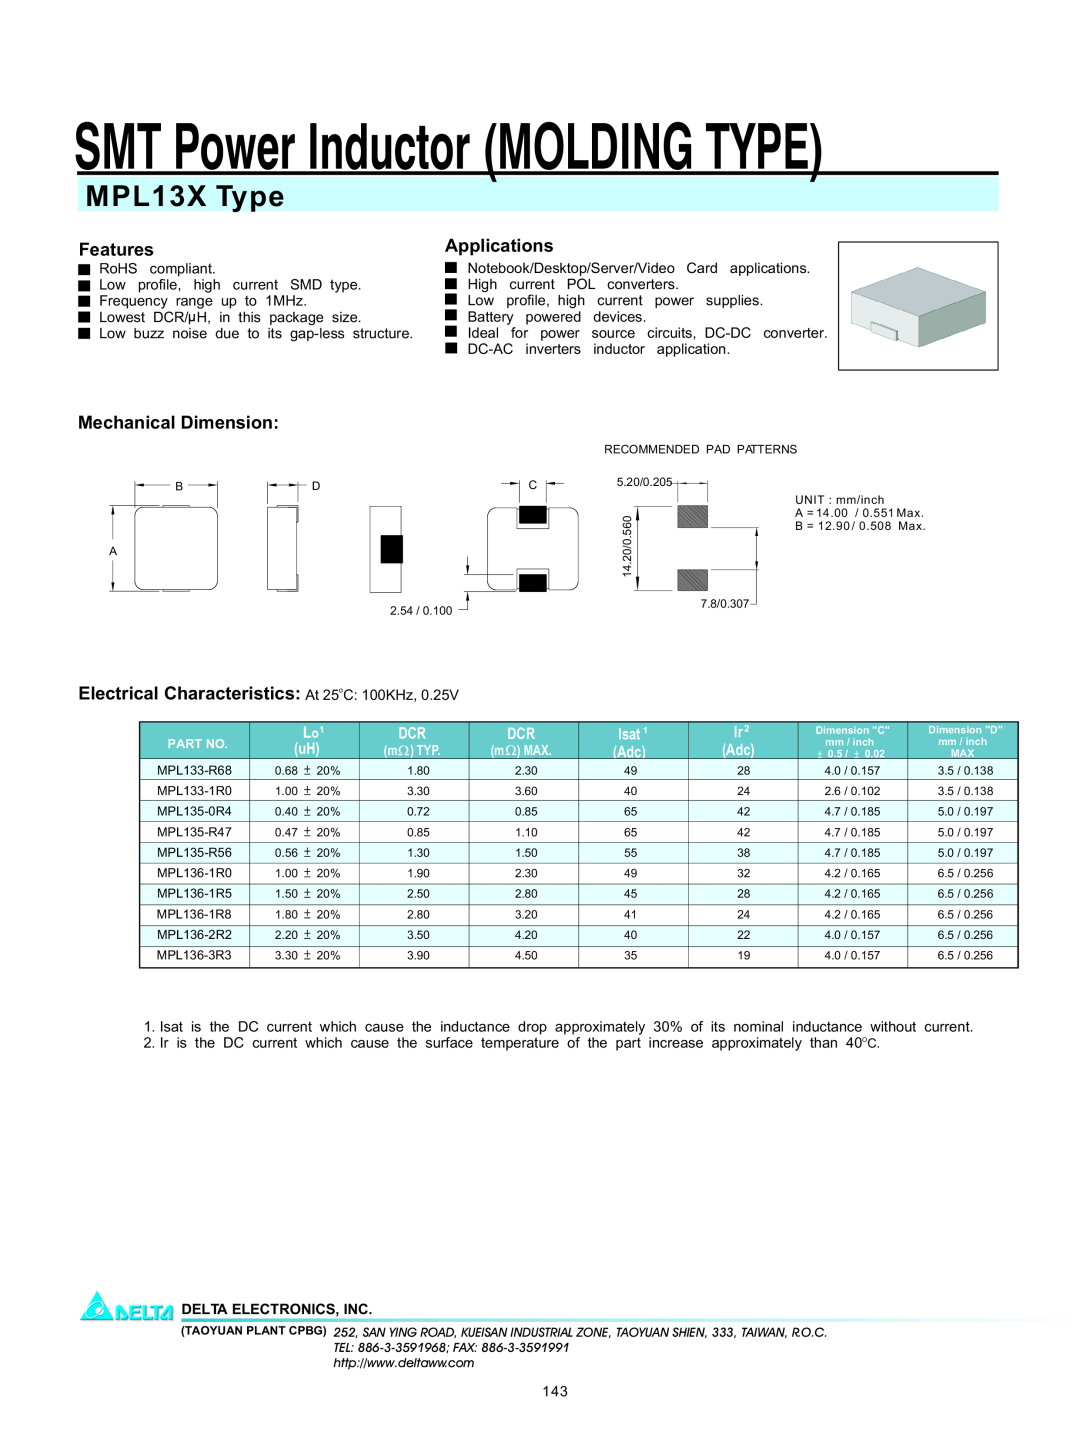 Delta Electronics manual SMT Power Inductor MOLDING TYPE, MPL13X Type, Features, Applications, Mechanical Dimension 